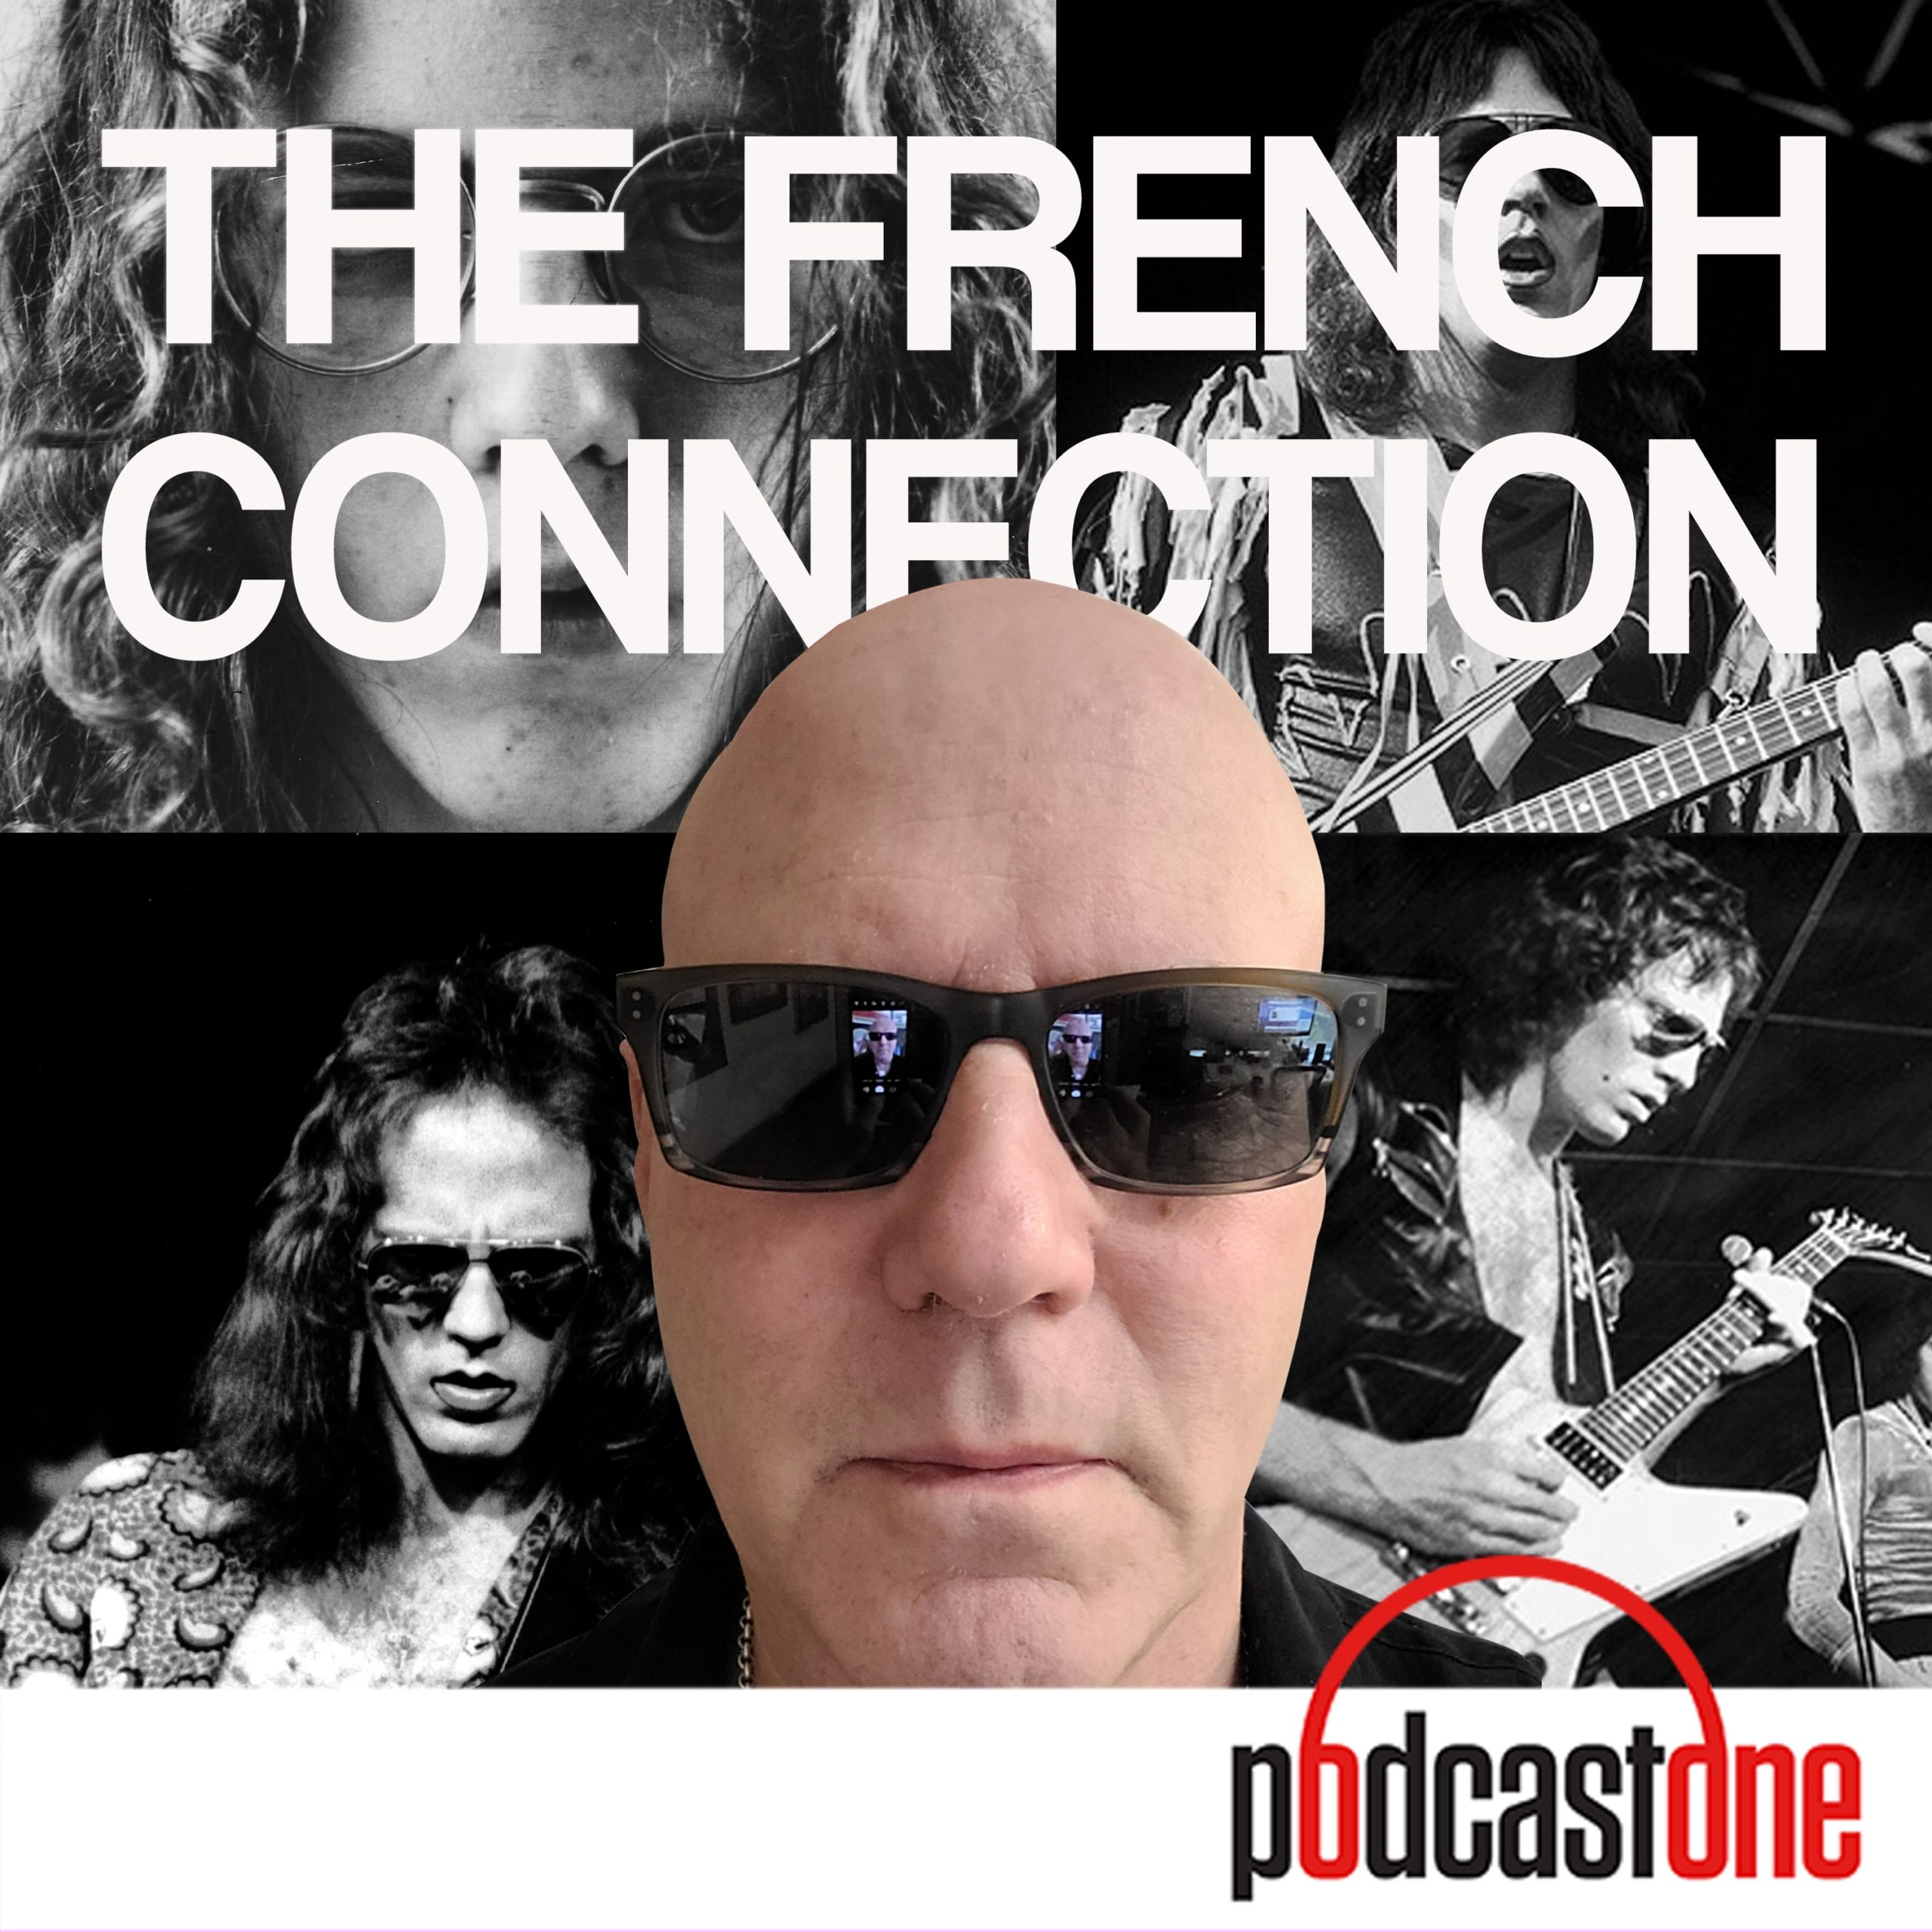 The Jay Jay French Connection, épisodes 46-50